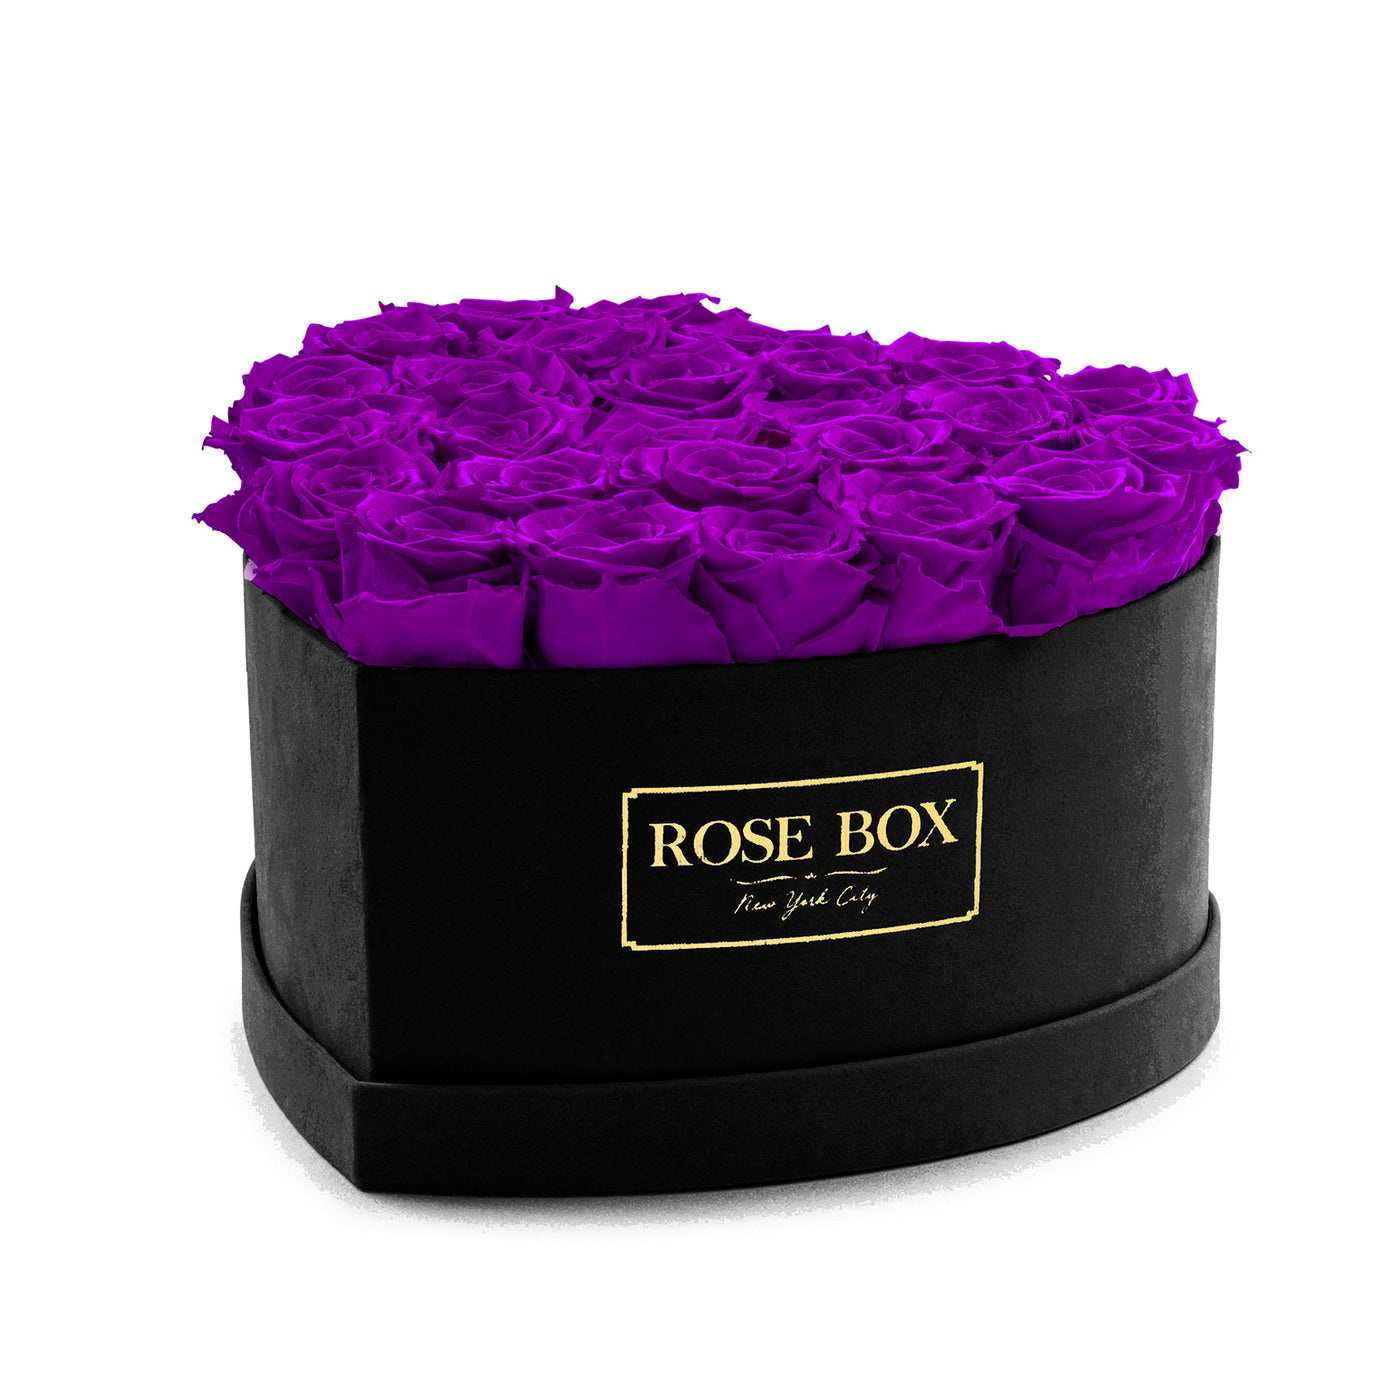 Large Black Heart Box with Royal Purple Roses